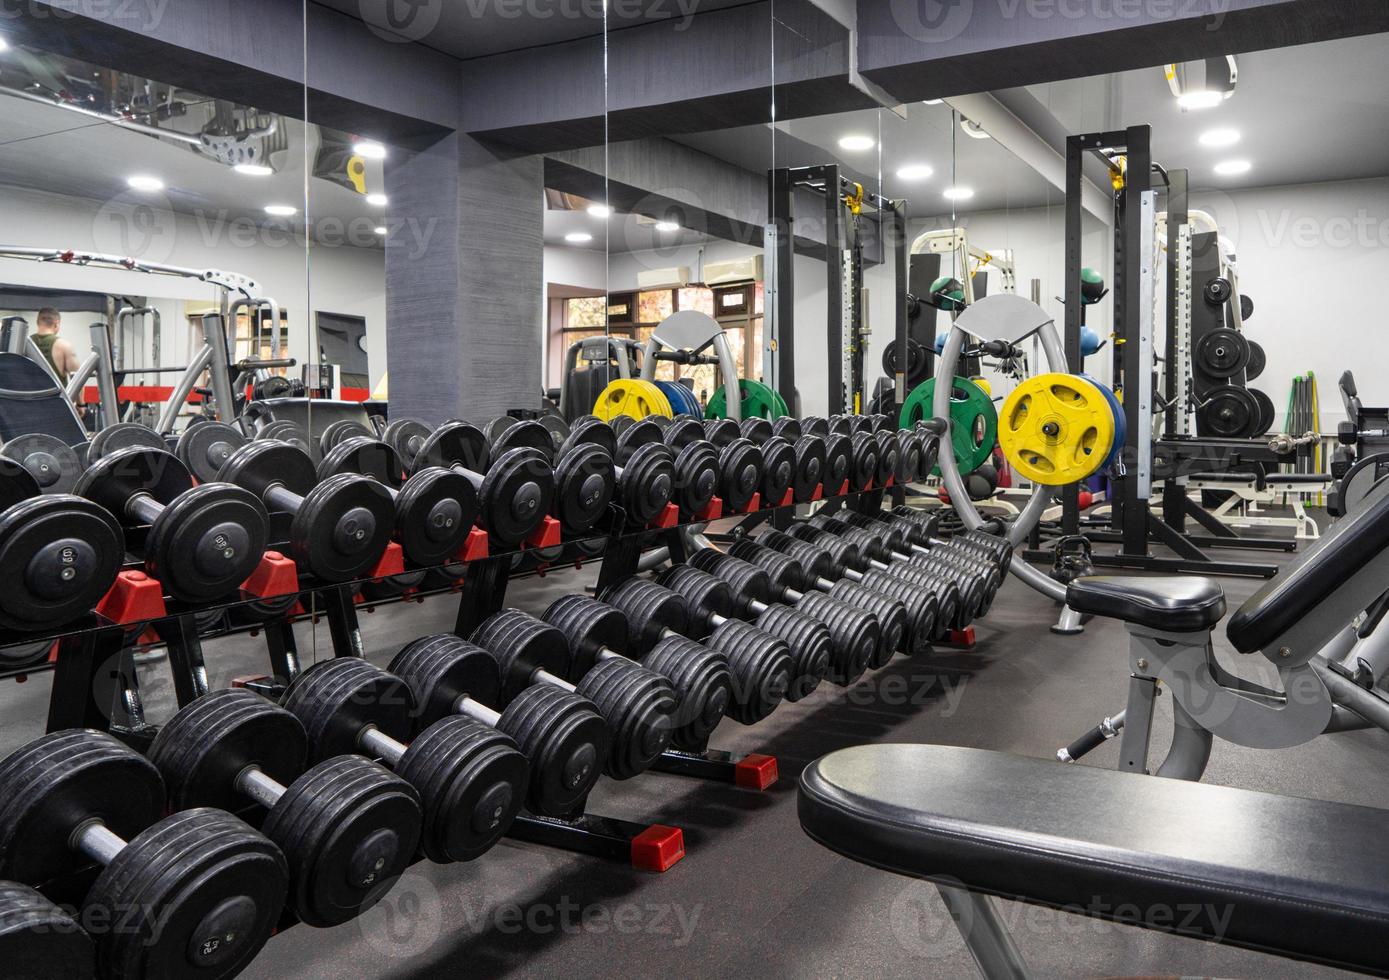 The dumbbells in the sports complex photo